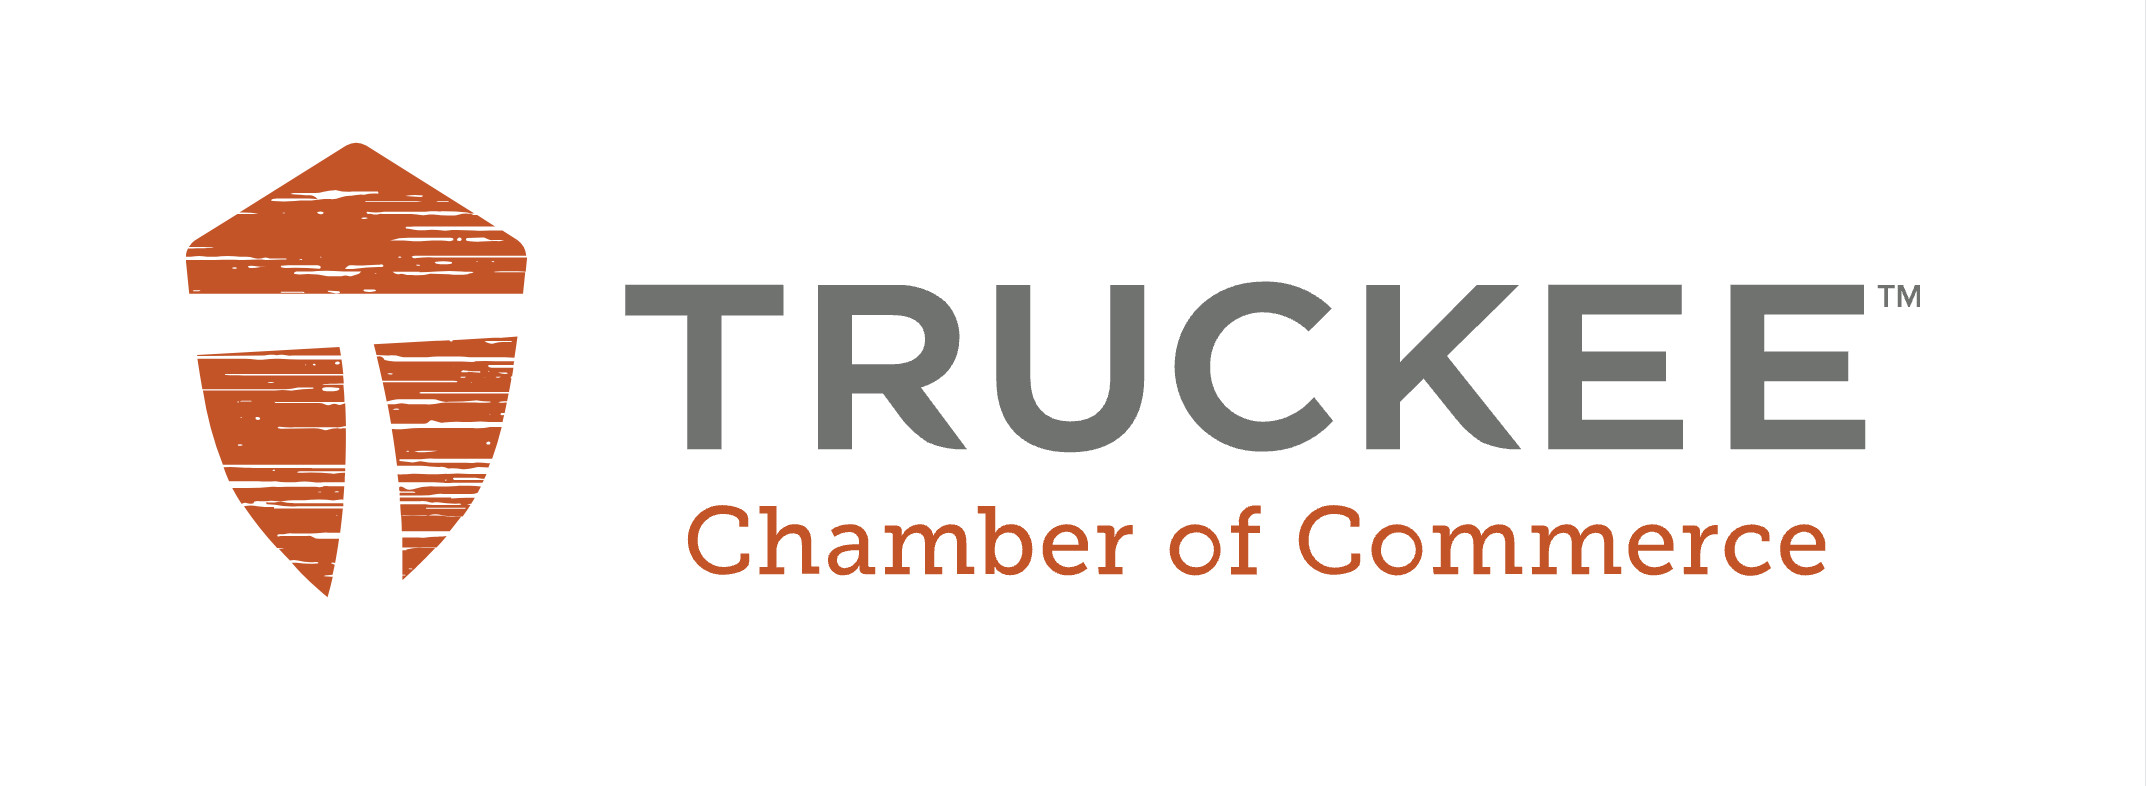 Truckee Chamber of Commerce